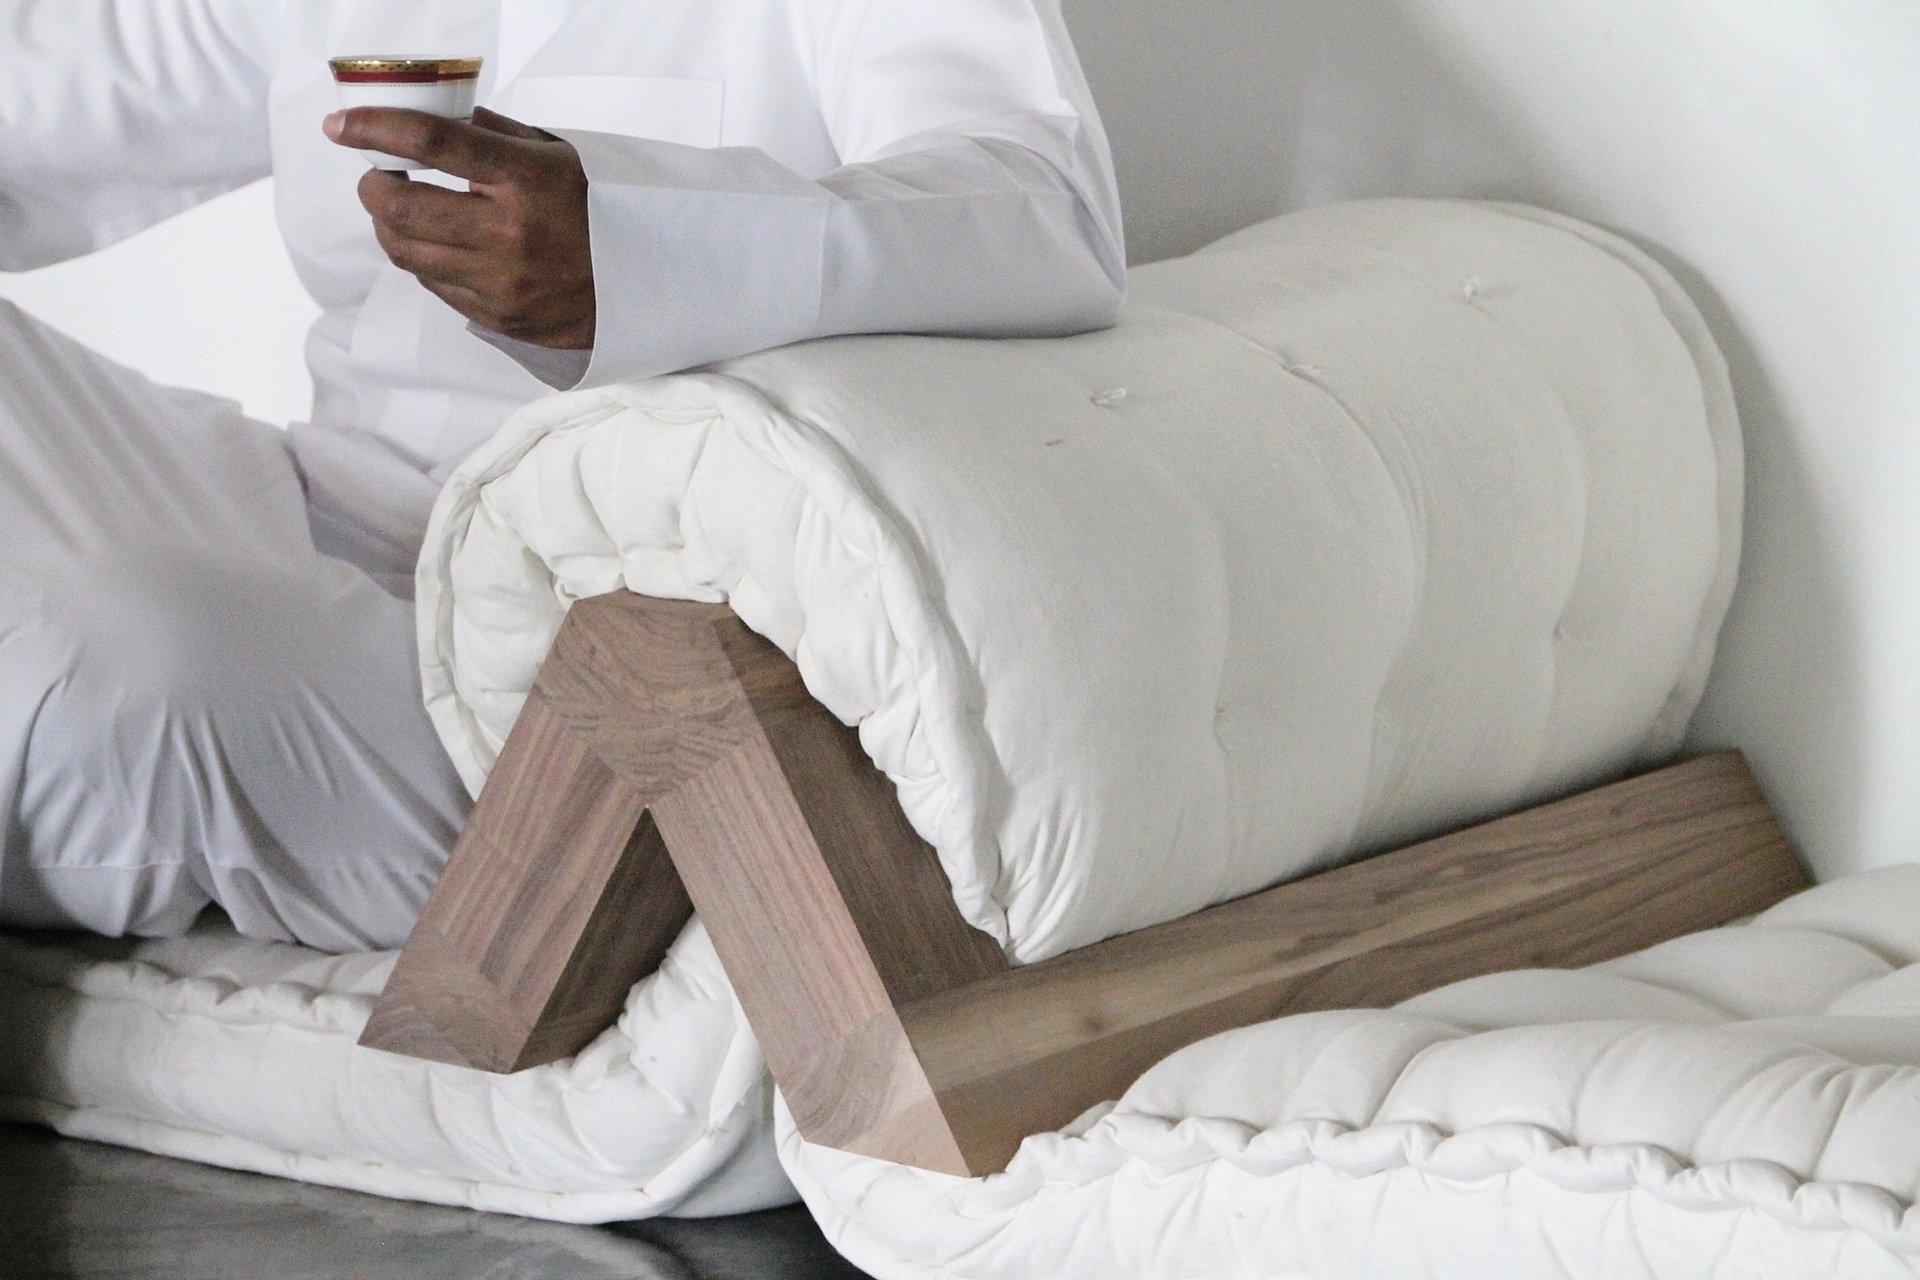 A close up of a wooden arm rest with a cushion.